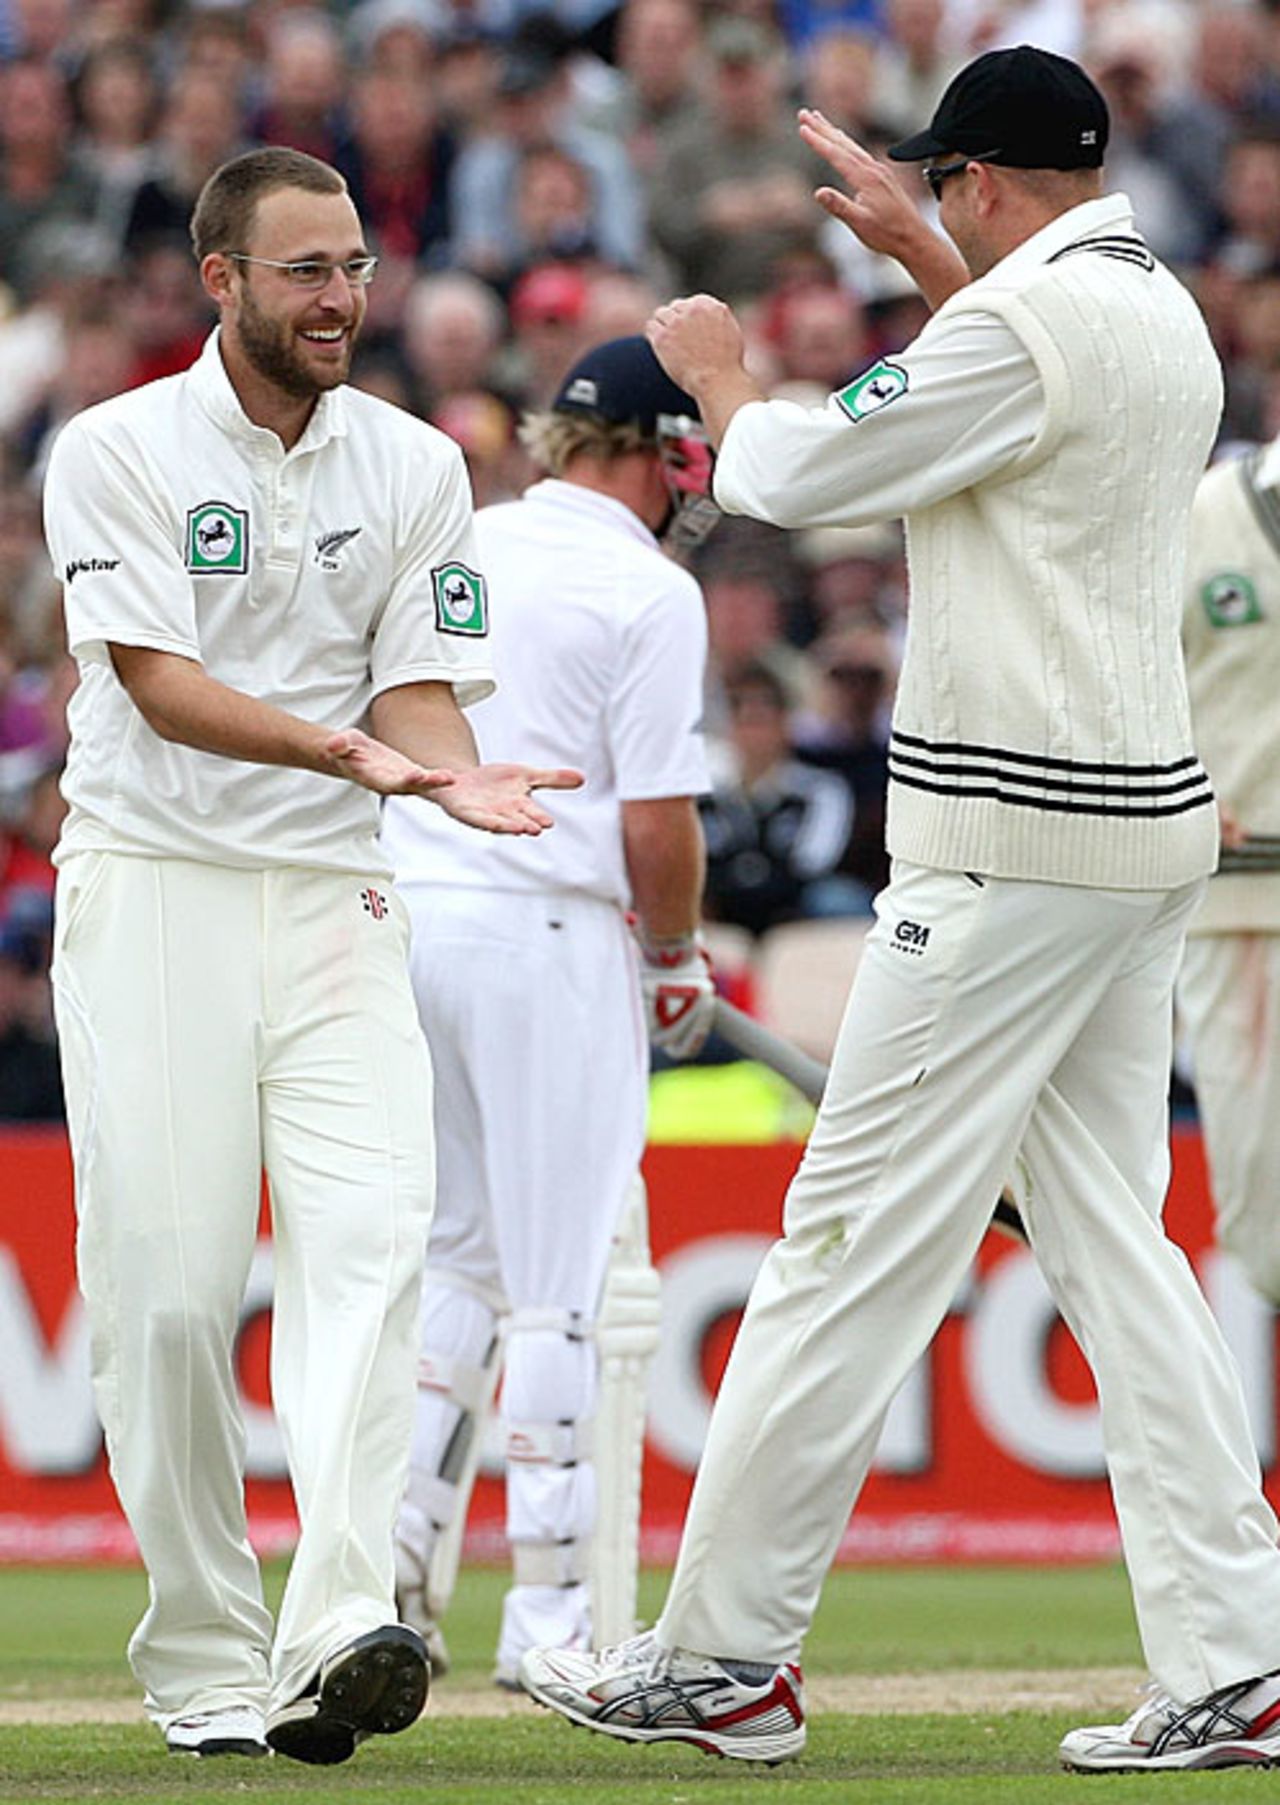 Daniel Vettori is congratulated on one of his five wickets, England v New Zealand, 2nd Test, Old Trafford, May 25, 2008